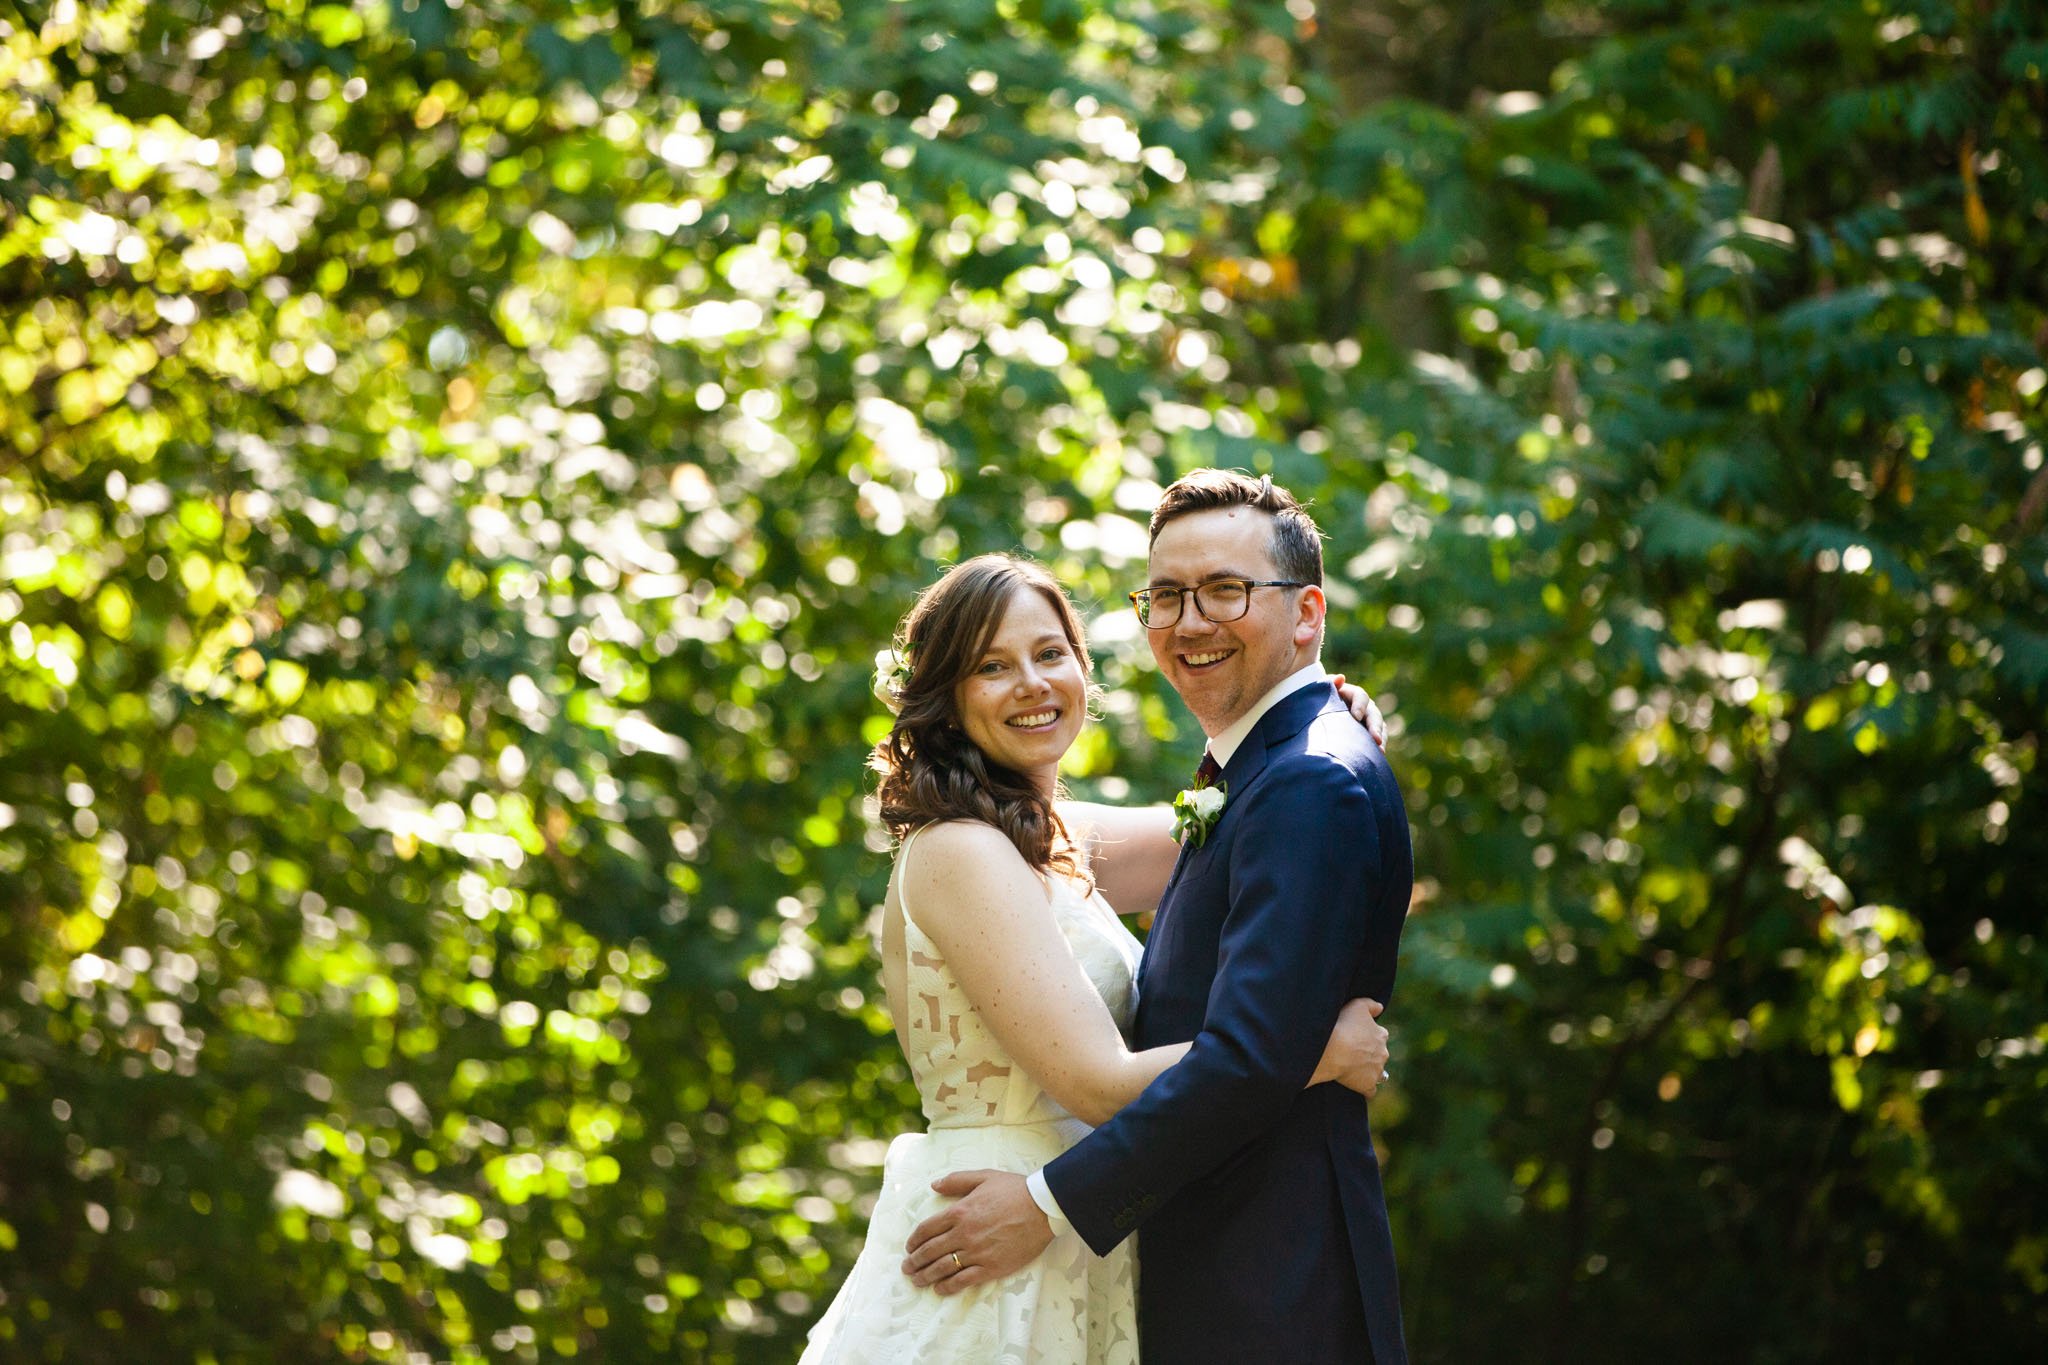 bride and groom couple portrait with green leaves in the background.jpg